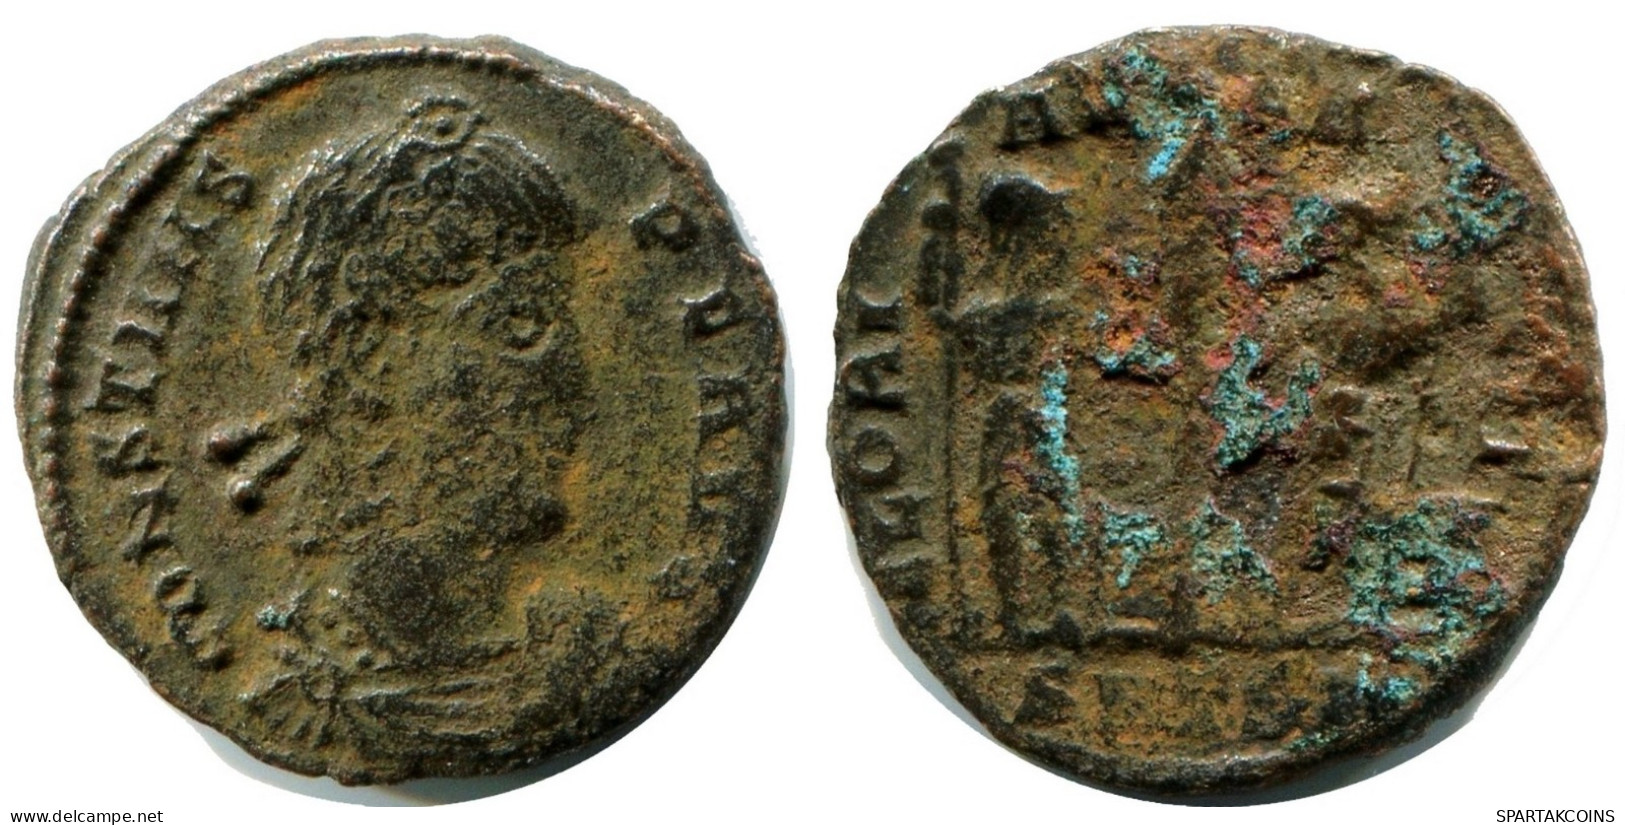 CONSTANS MINTED IN THESSALONICA FROM THE ROYAL ONTARIO MUSEUM #ANC11883.14.F.A - The Christian Empire (307 AD Tot 363 AD)